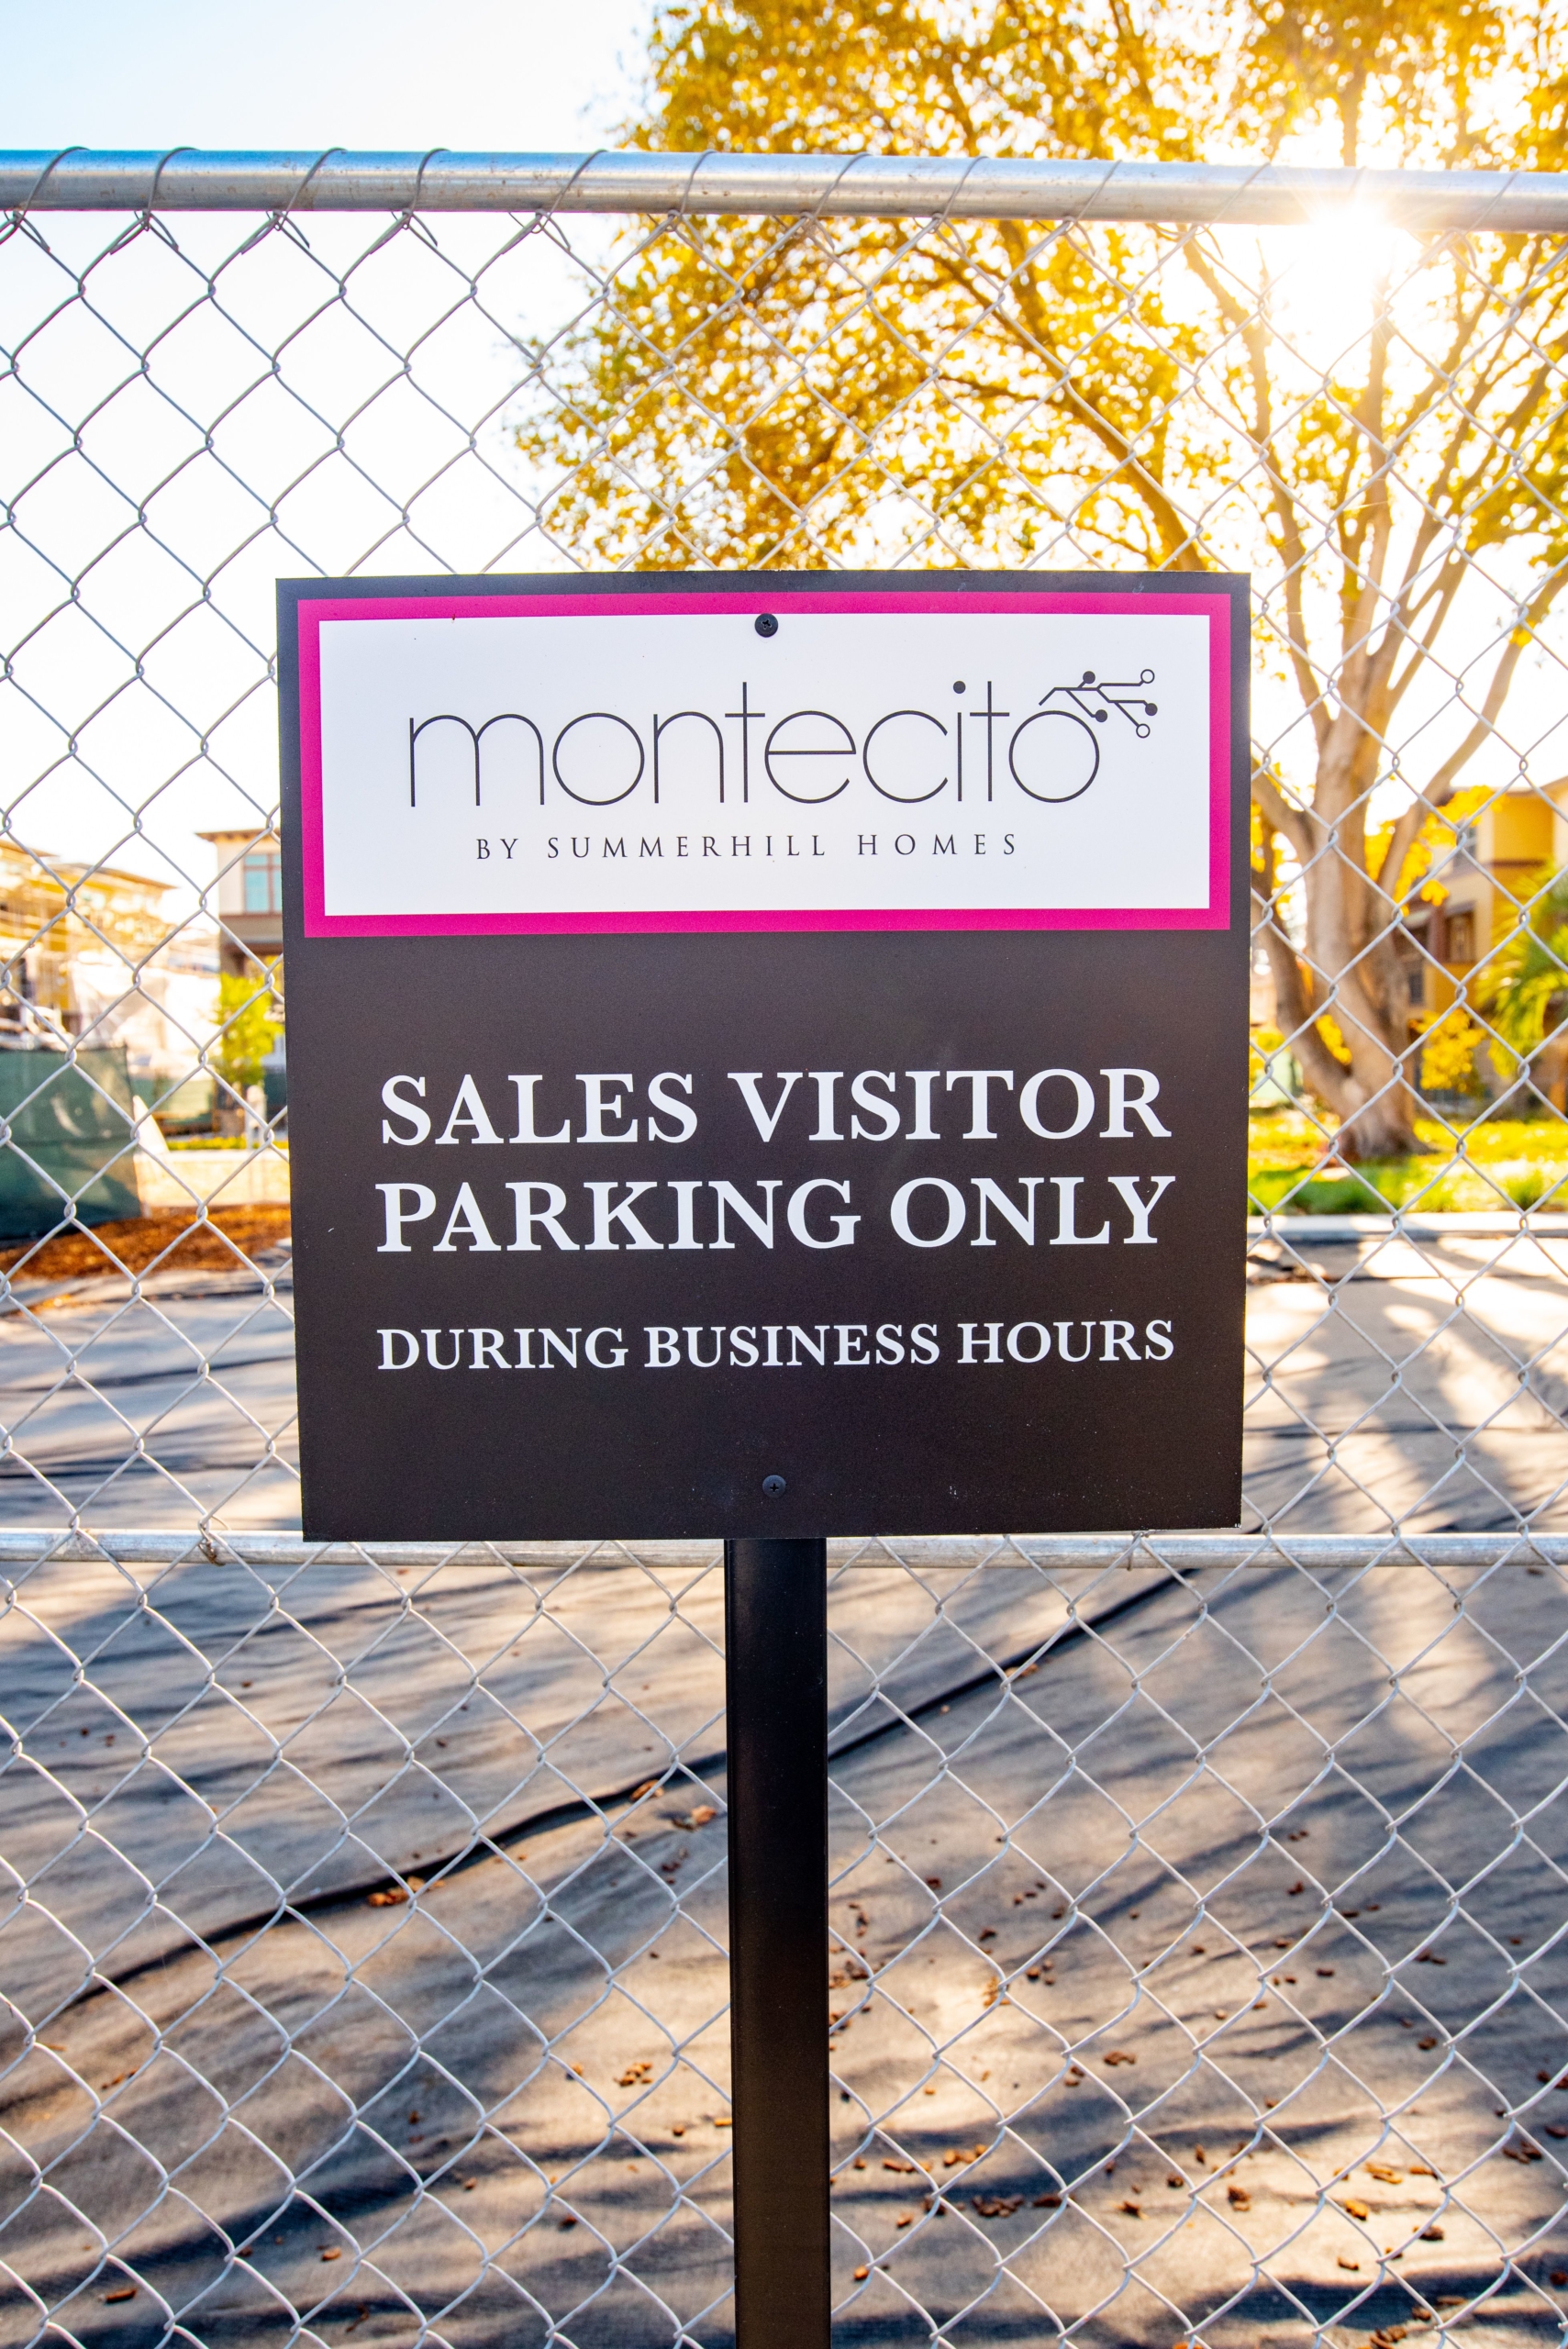 Montecito by Summerhill Homes Signage 6